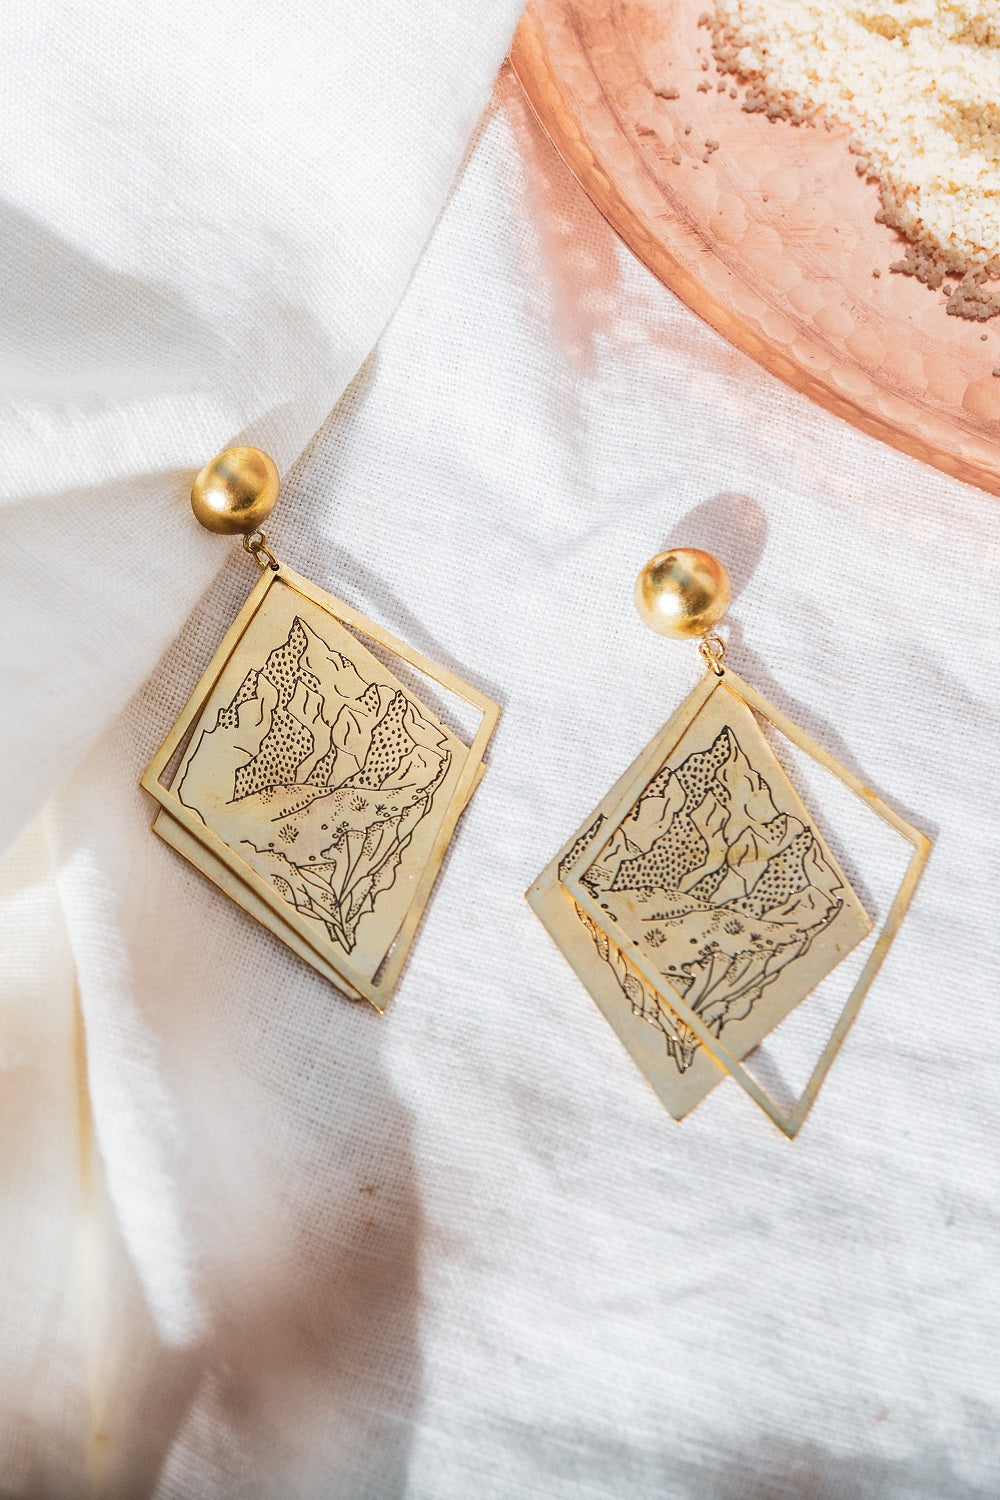 Pahar Handetched Earrings